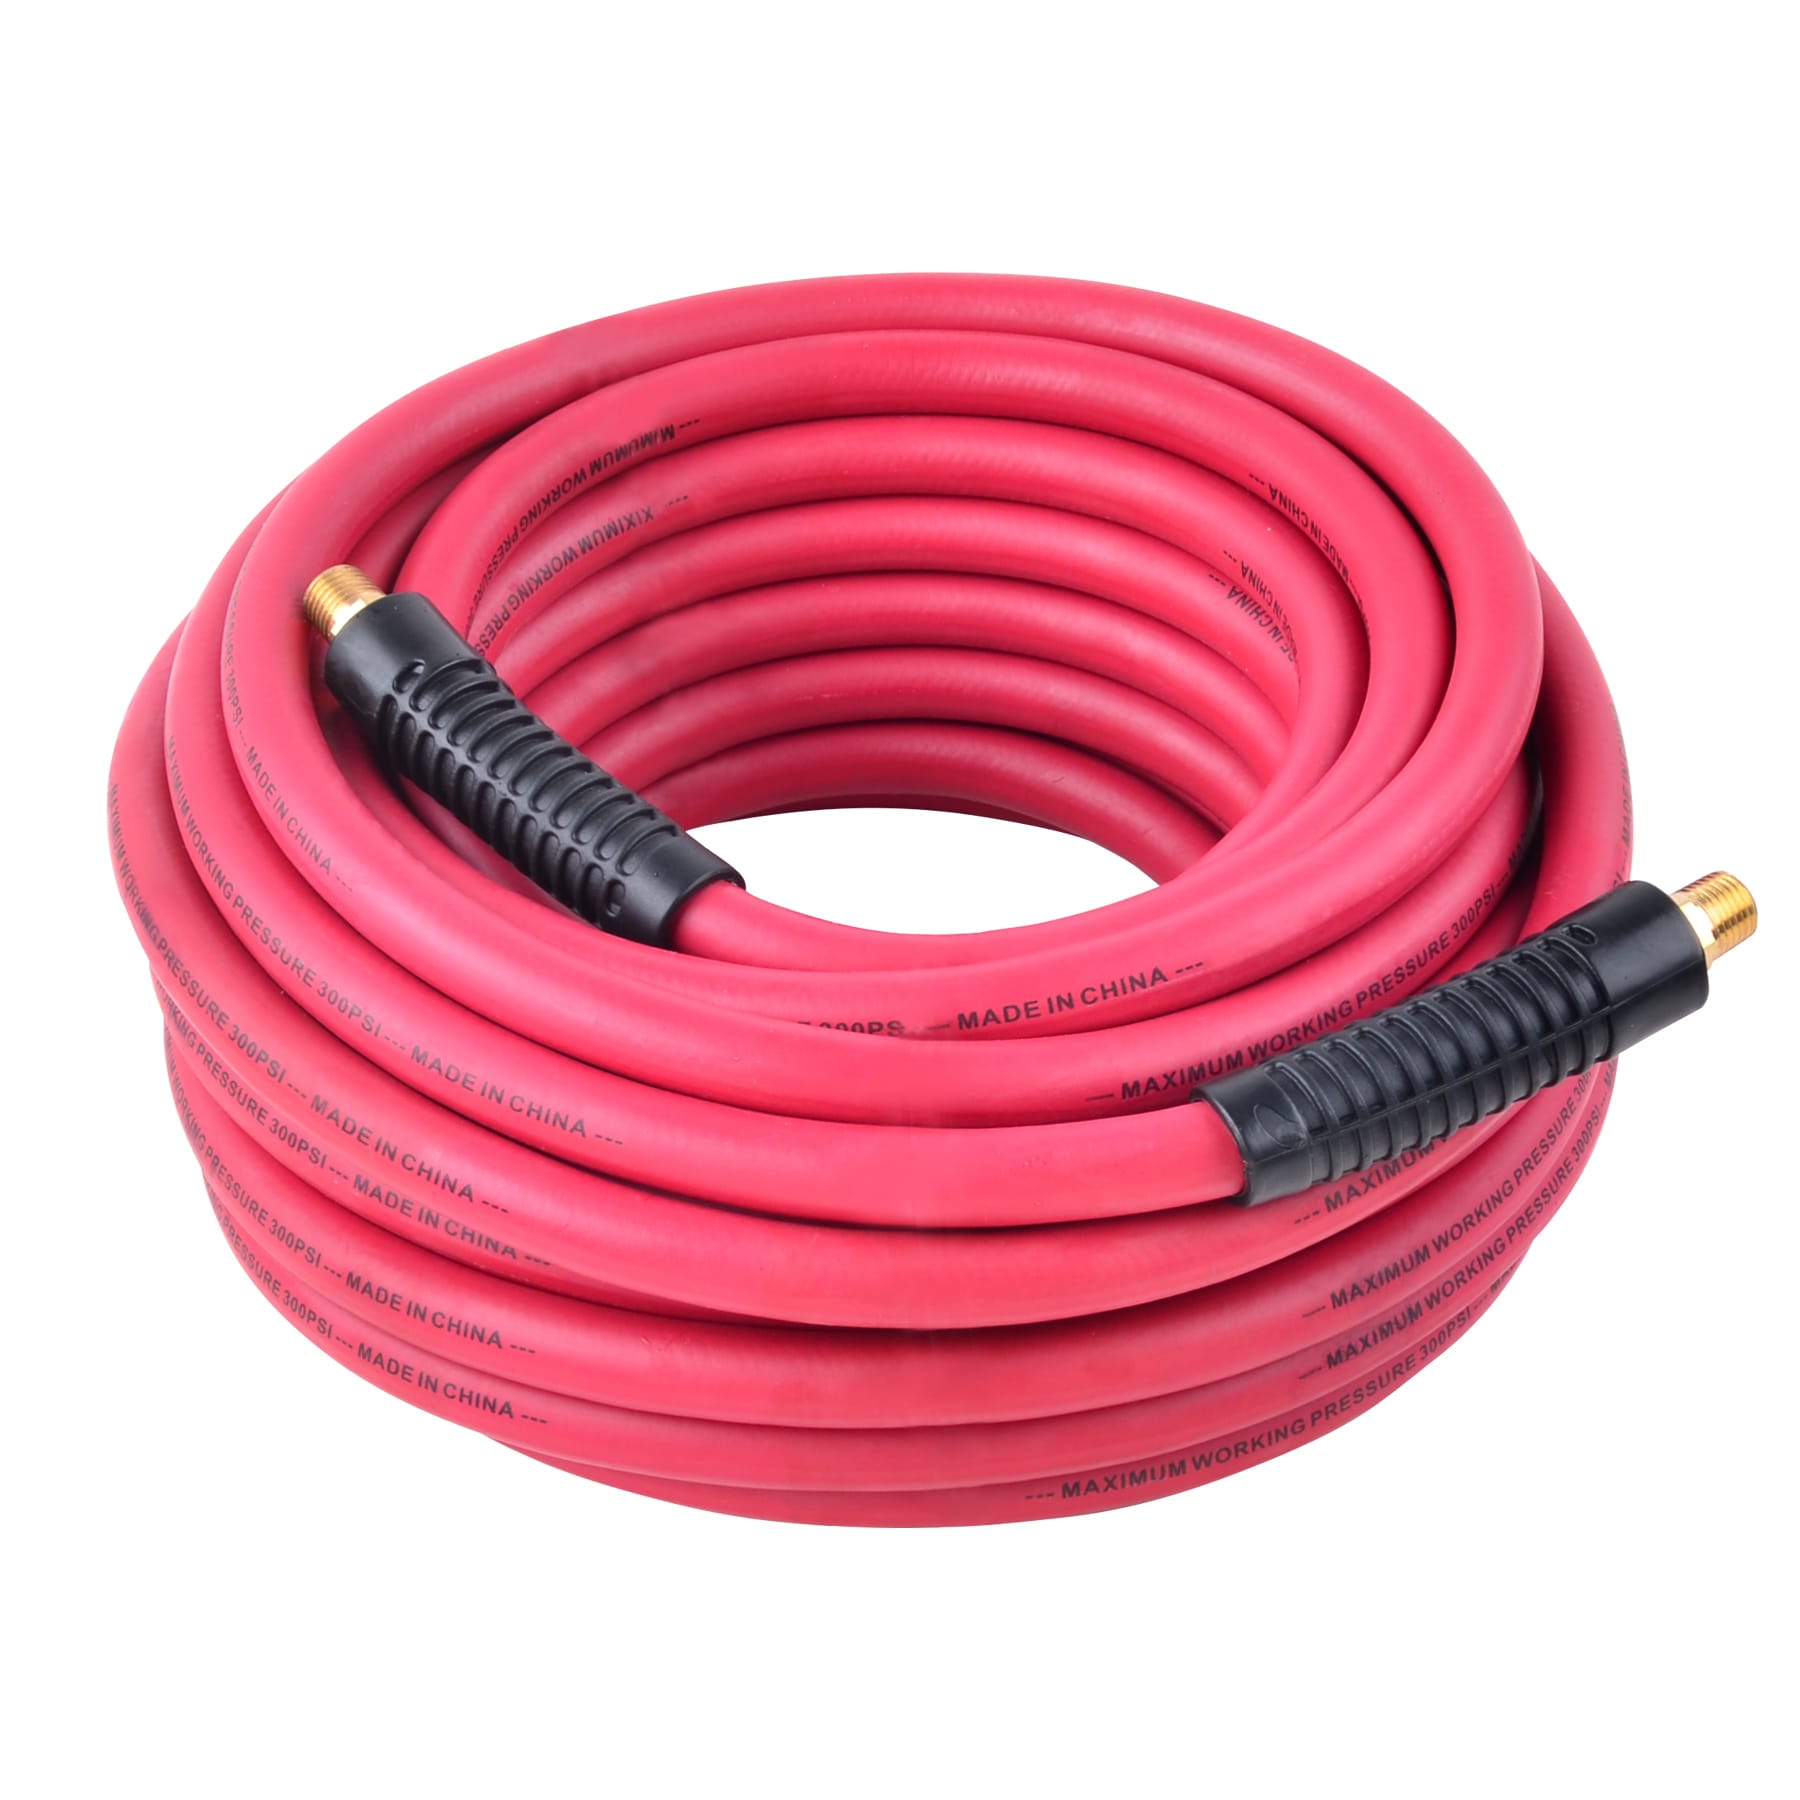 CRAFTSMAN CRAFTSMAN 3/8-in x 50-Ft Rubber Air Hose at